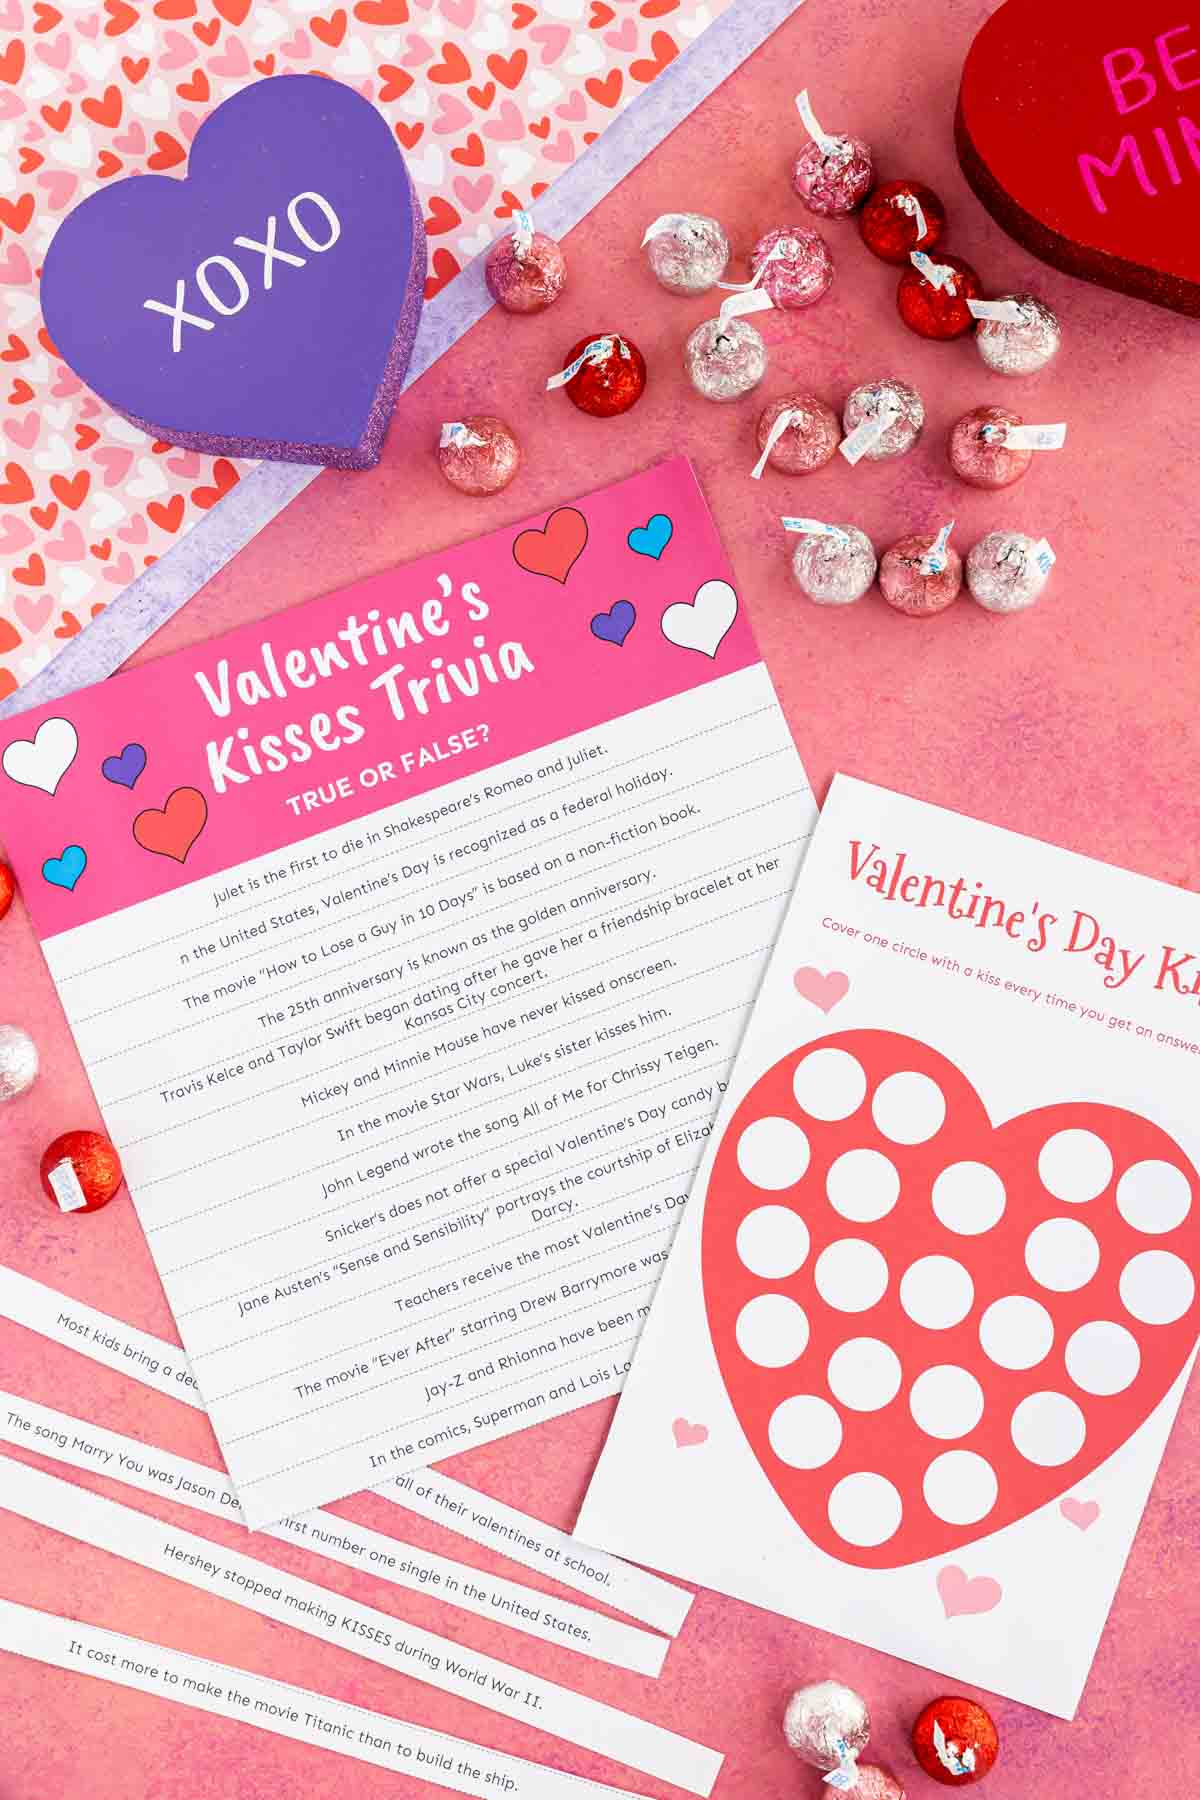 printed out Valentine's Day trivia questions